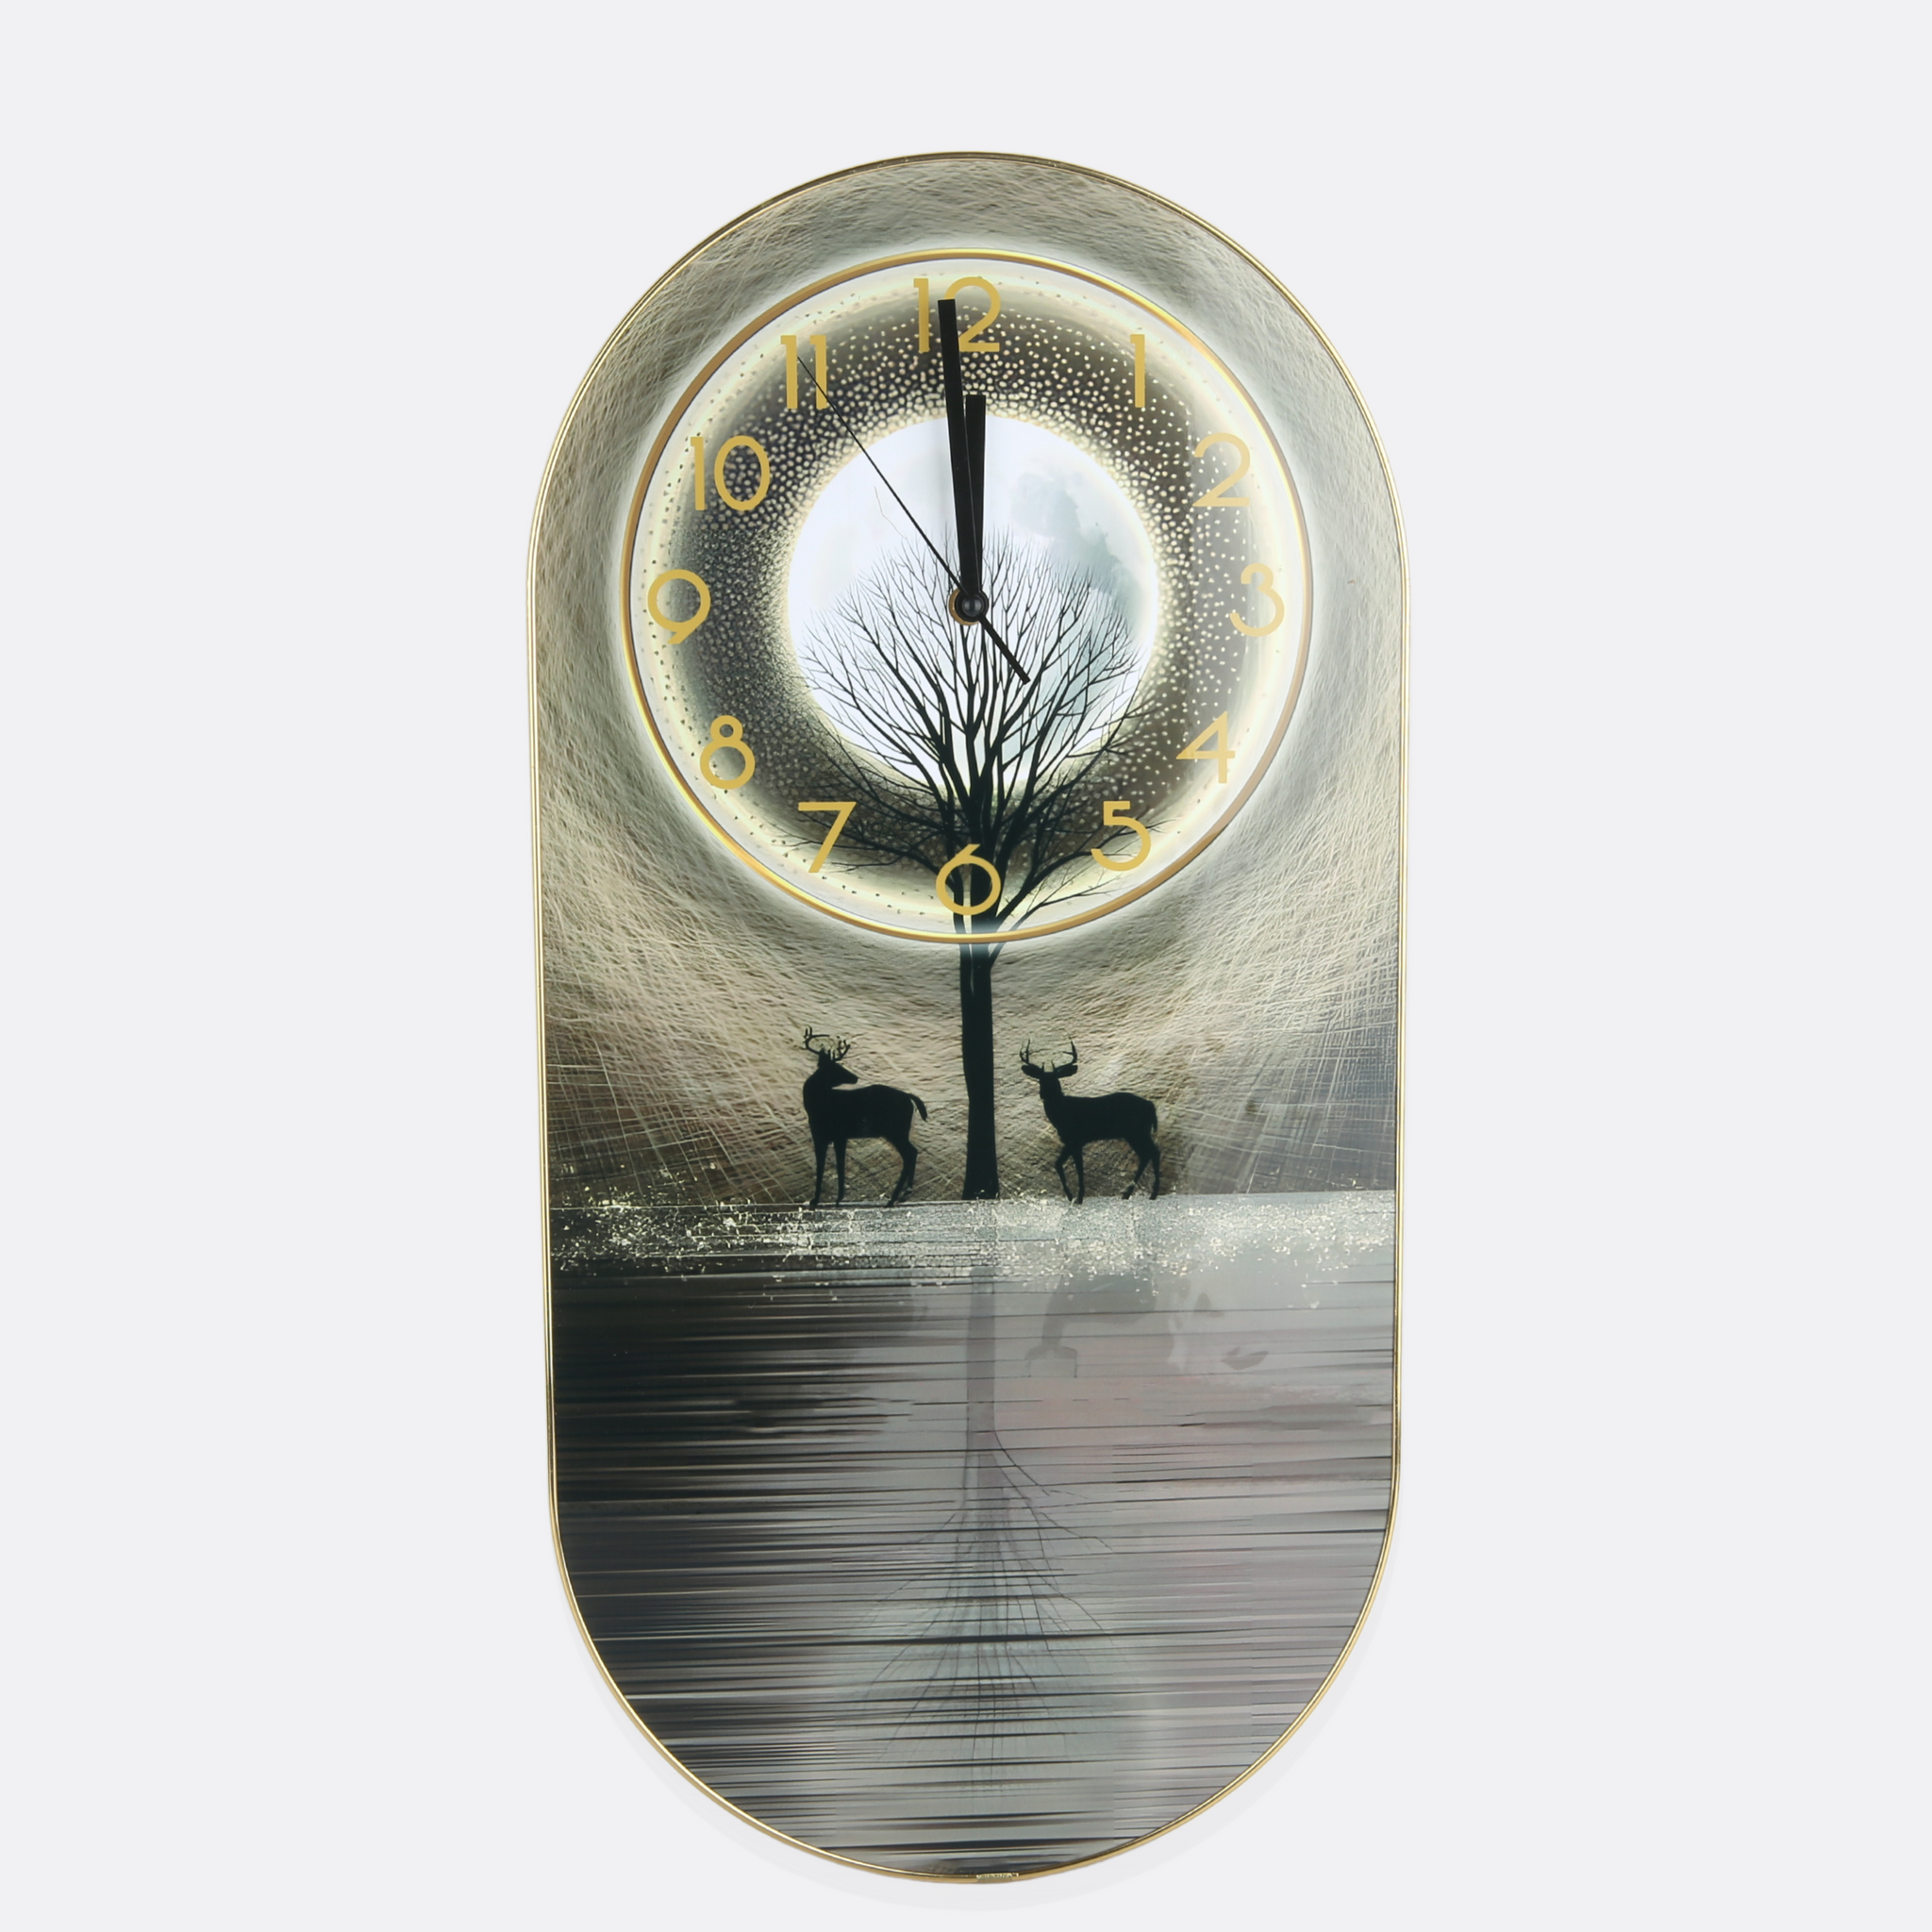 Brooding Wooden Wall Clock With Golden Edges